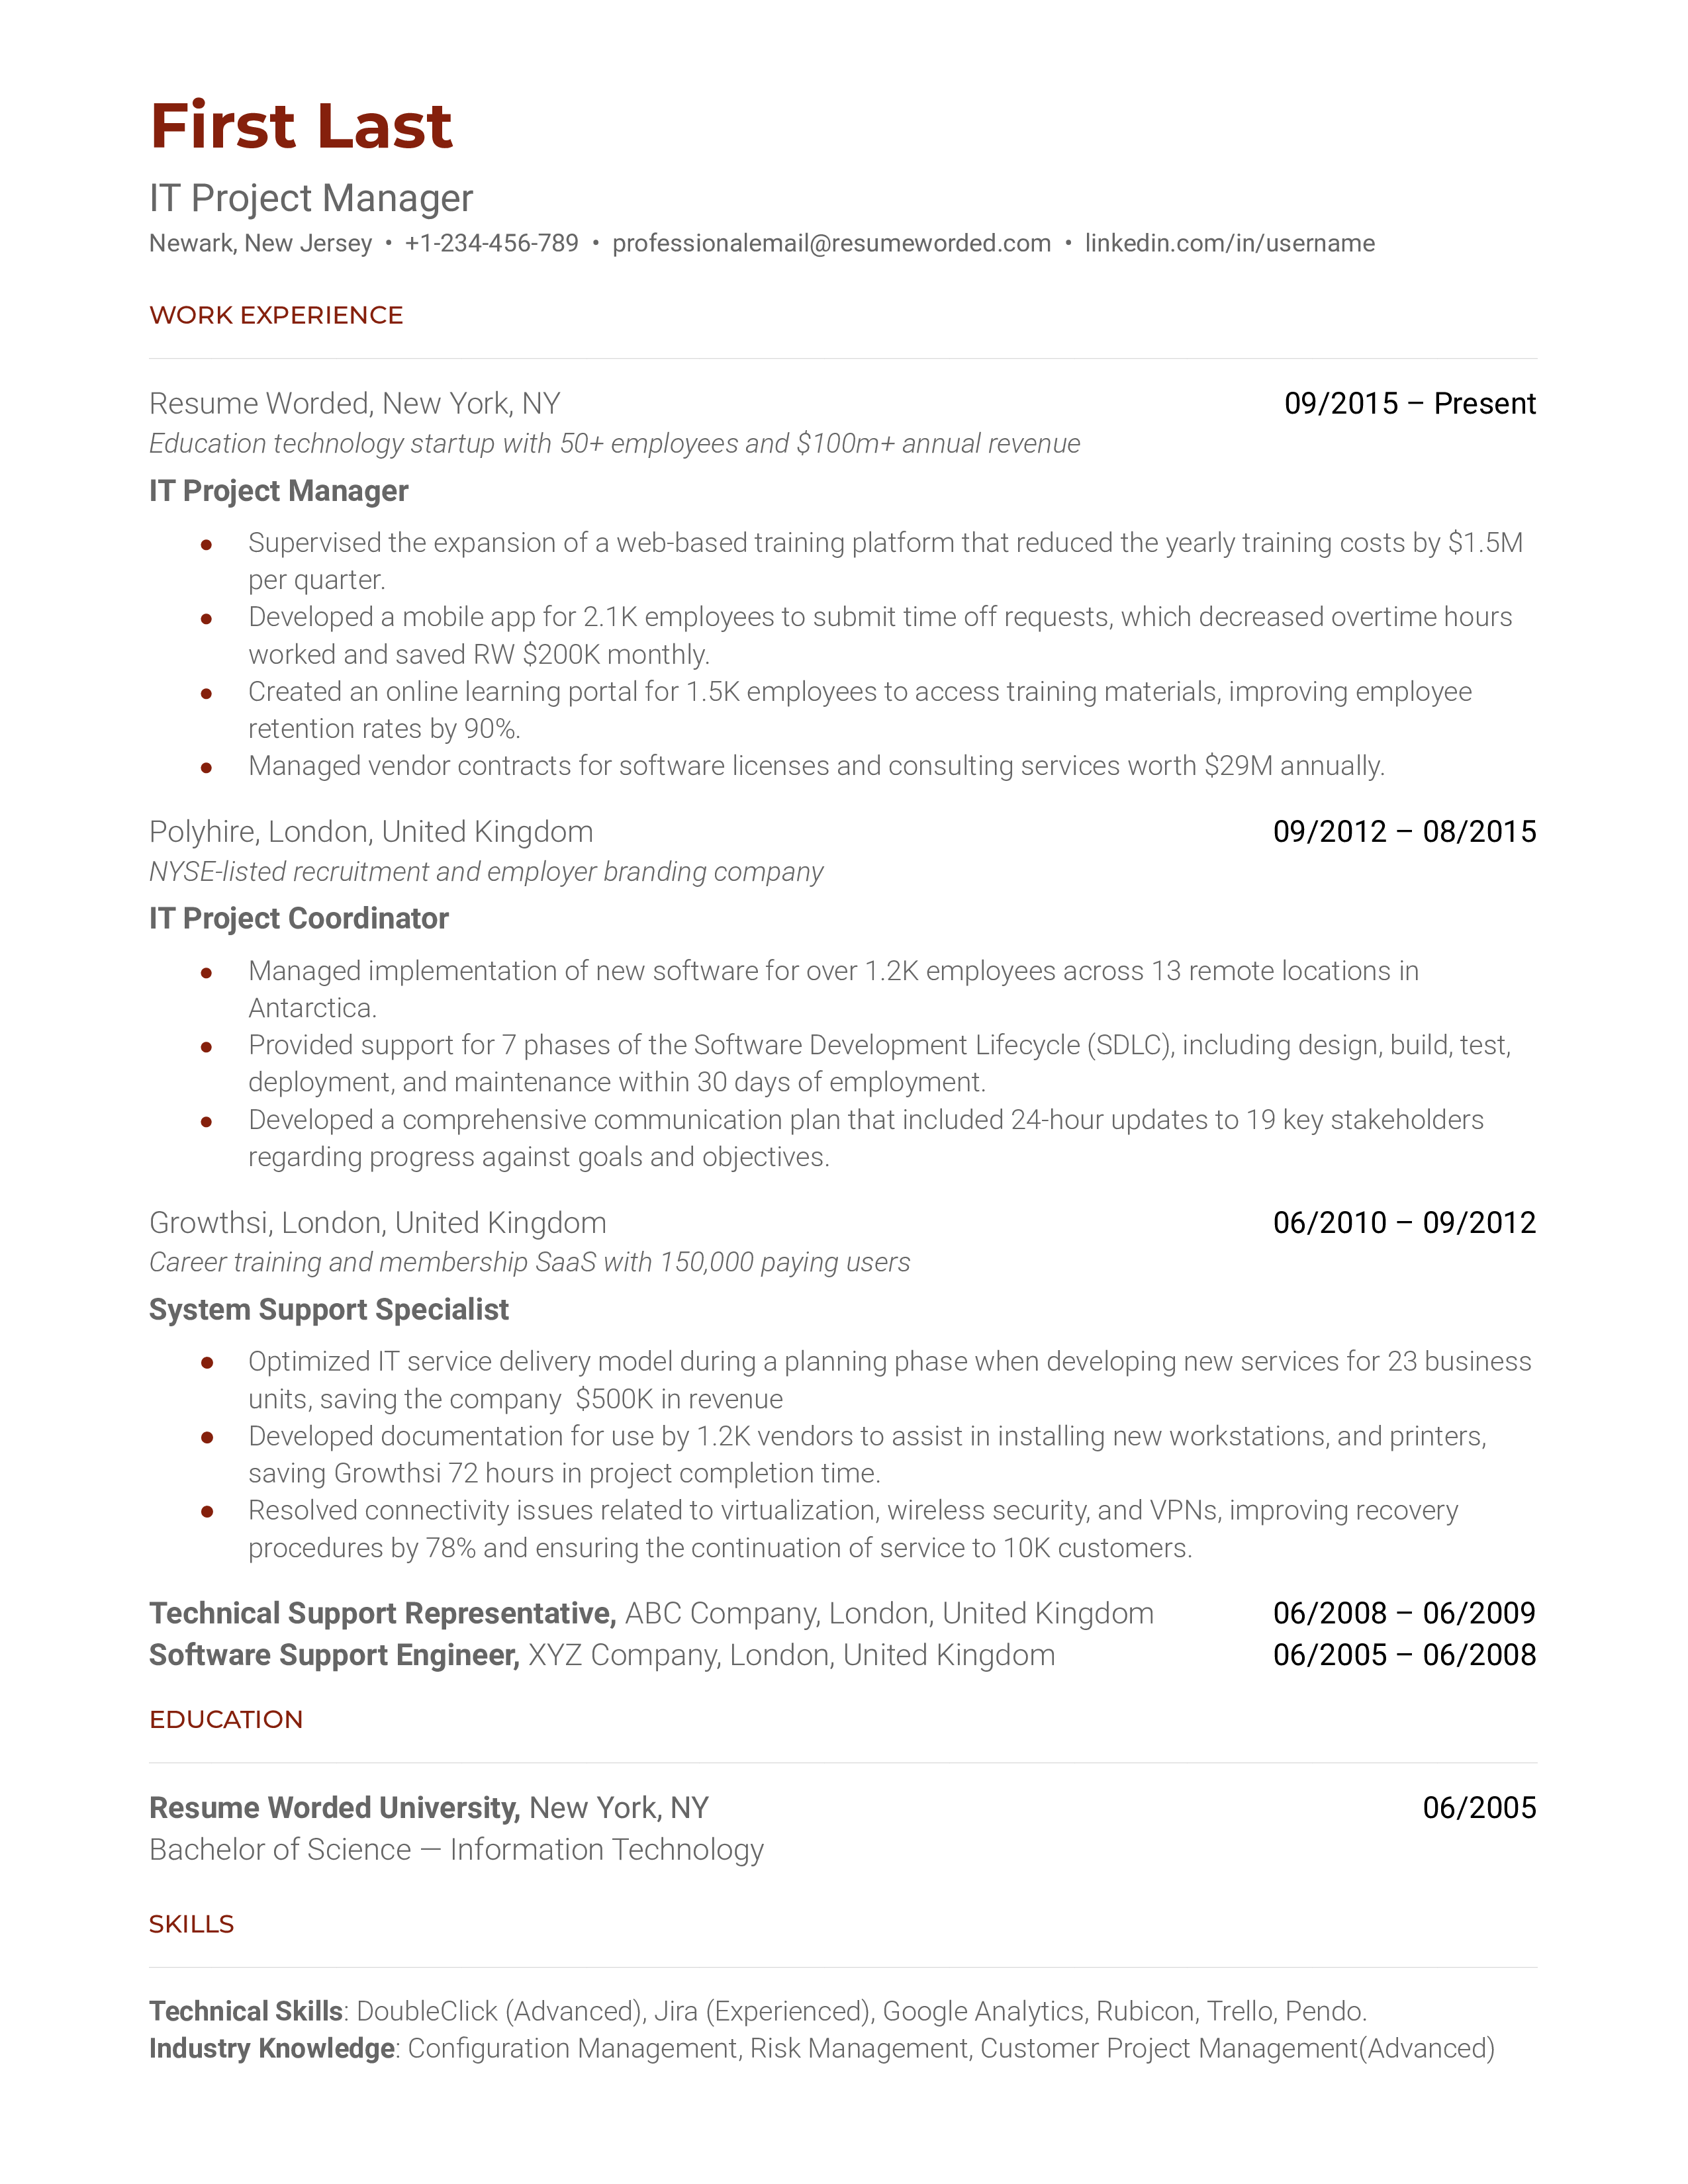 Alt text: A well-structured CV for an IT Project Manager position.